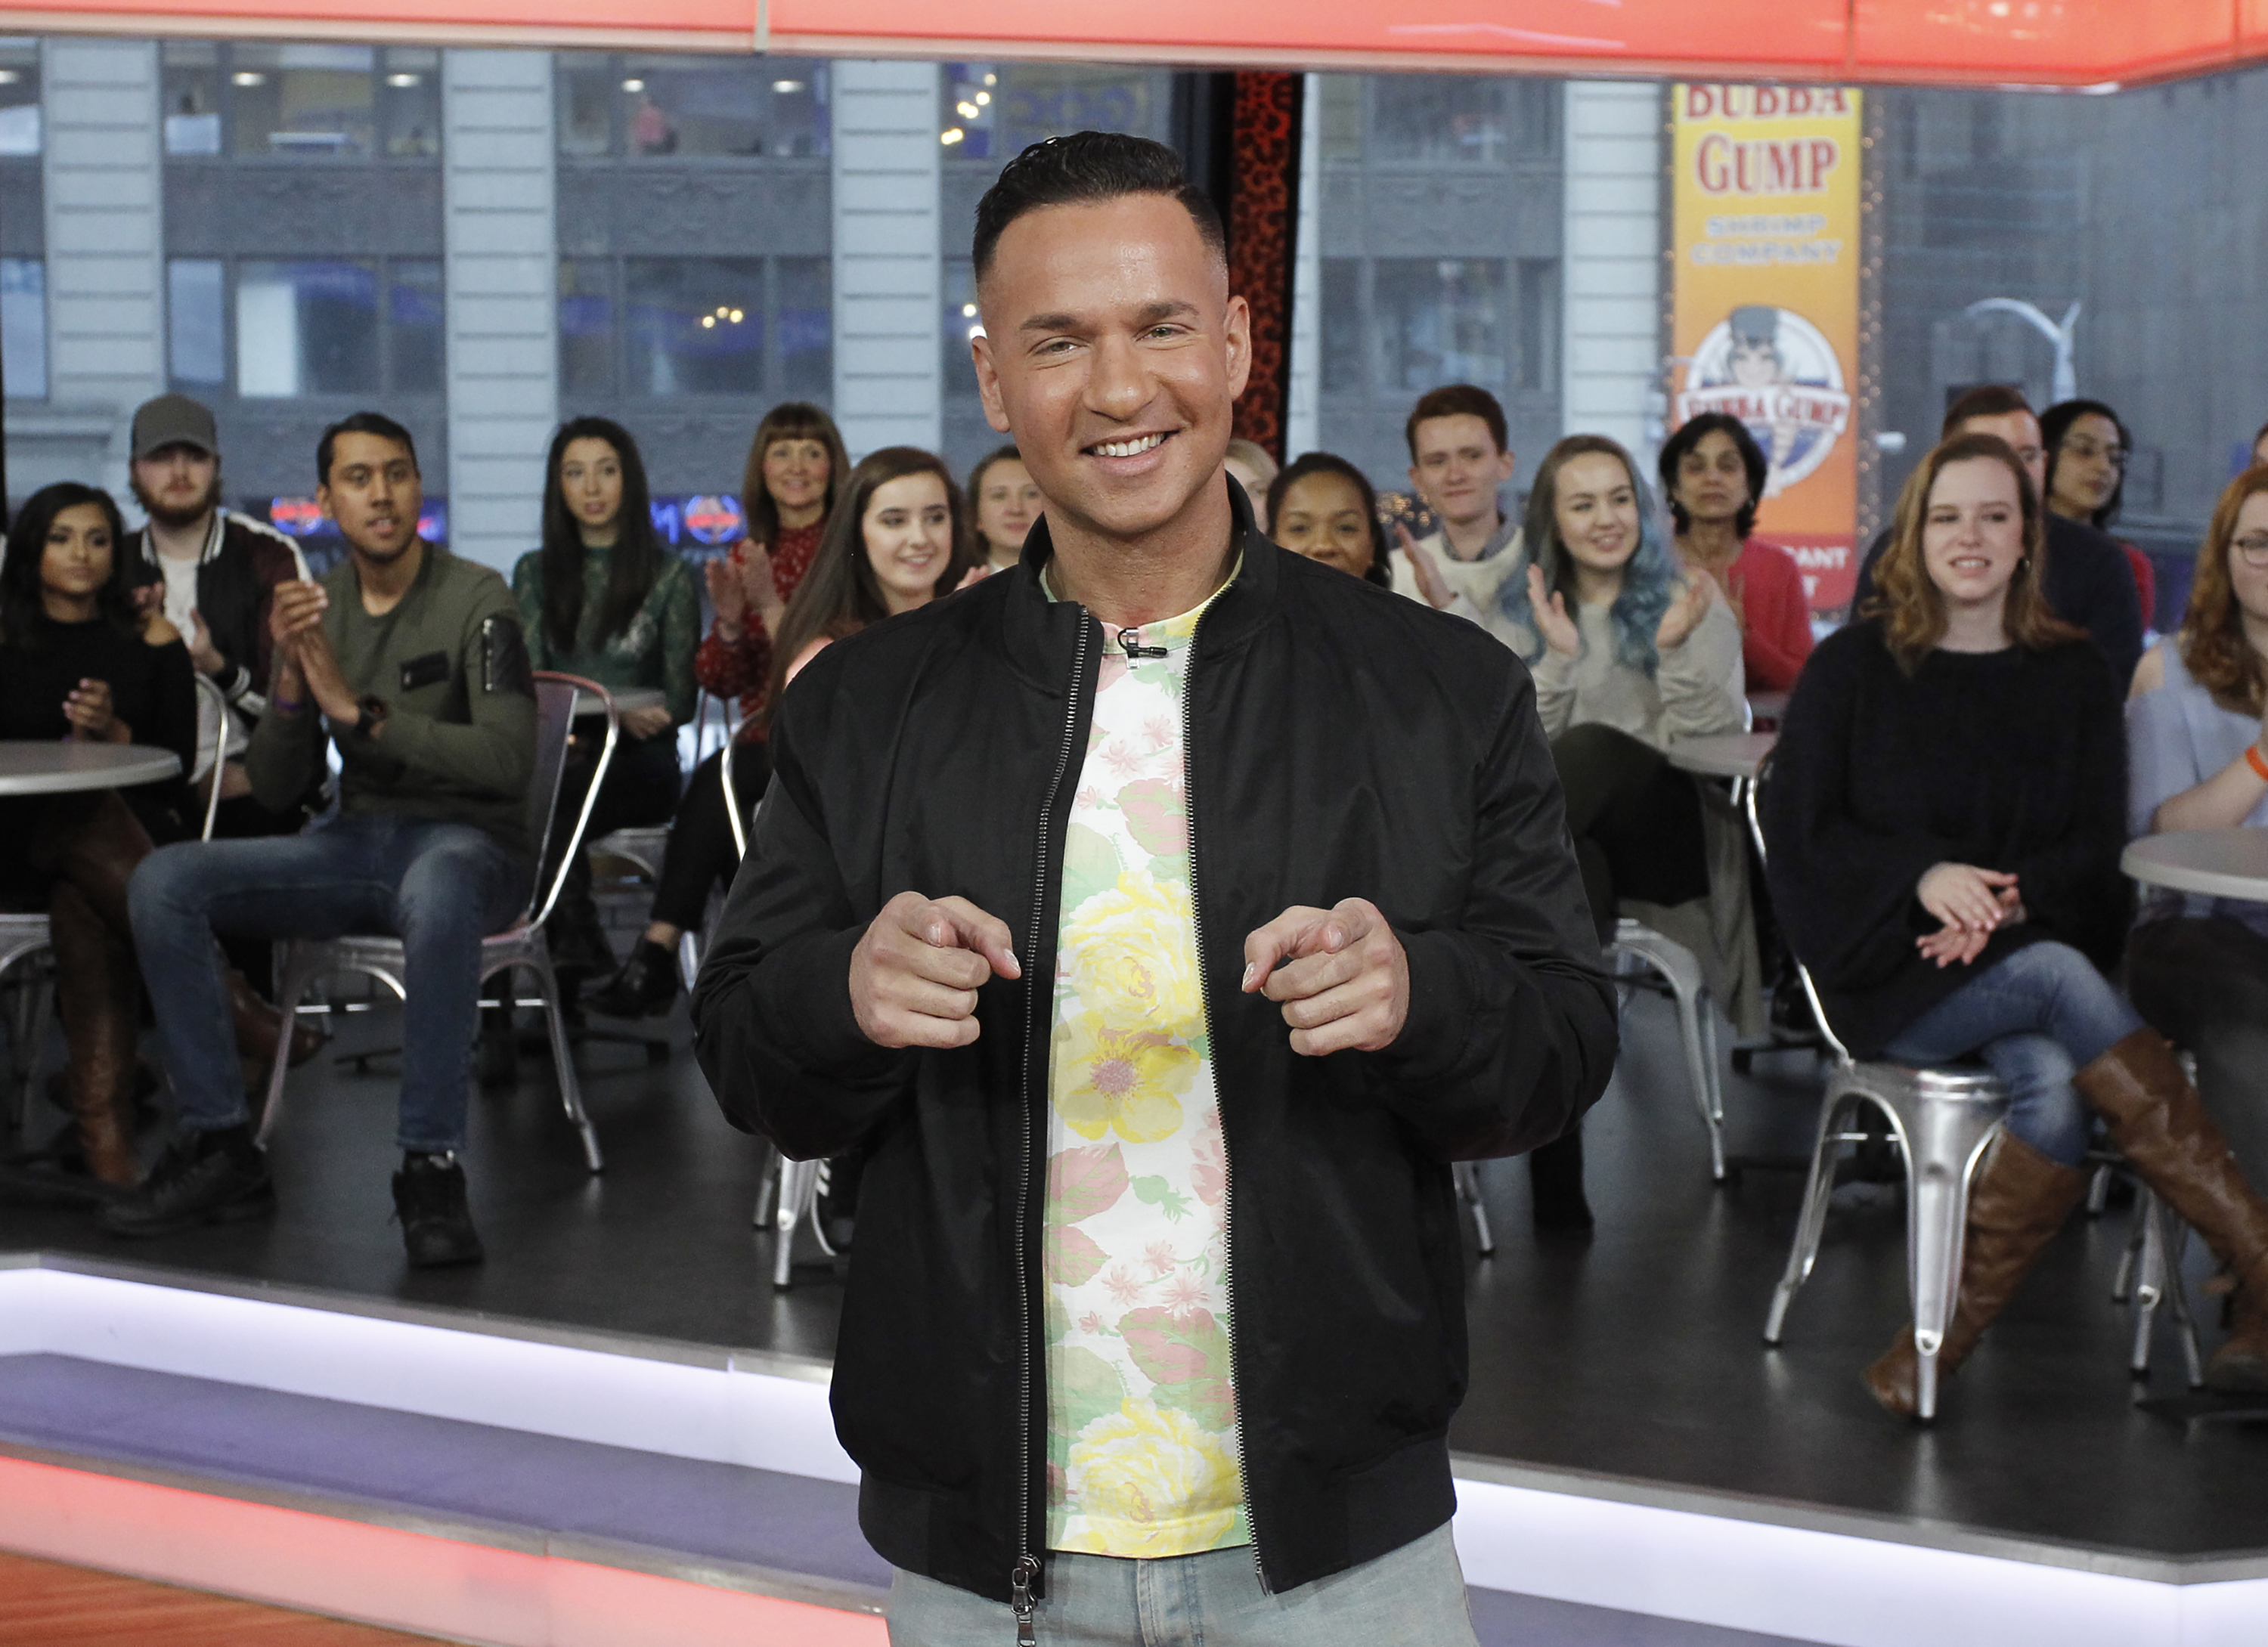 'Jersey Shore: Family Vacation' star Mike 'The Situation' Sorrentino poses at GMA